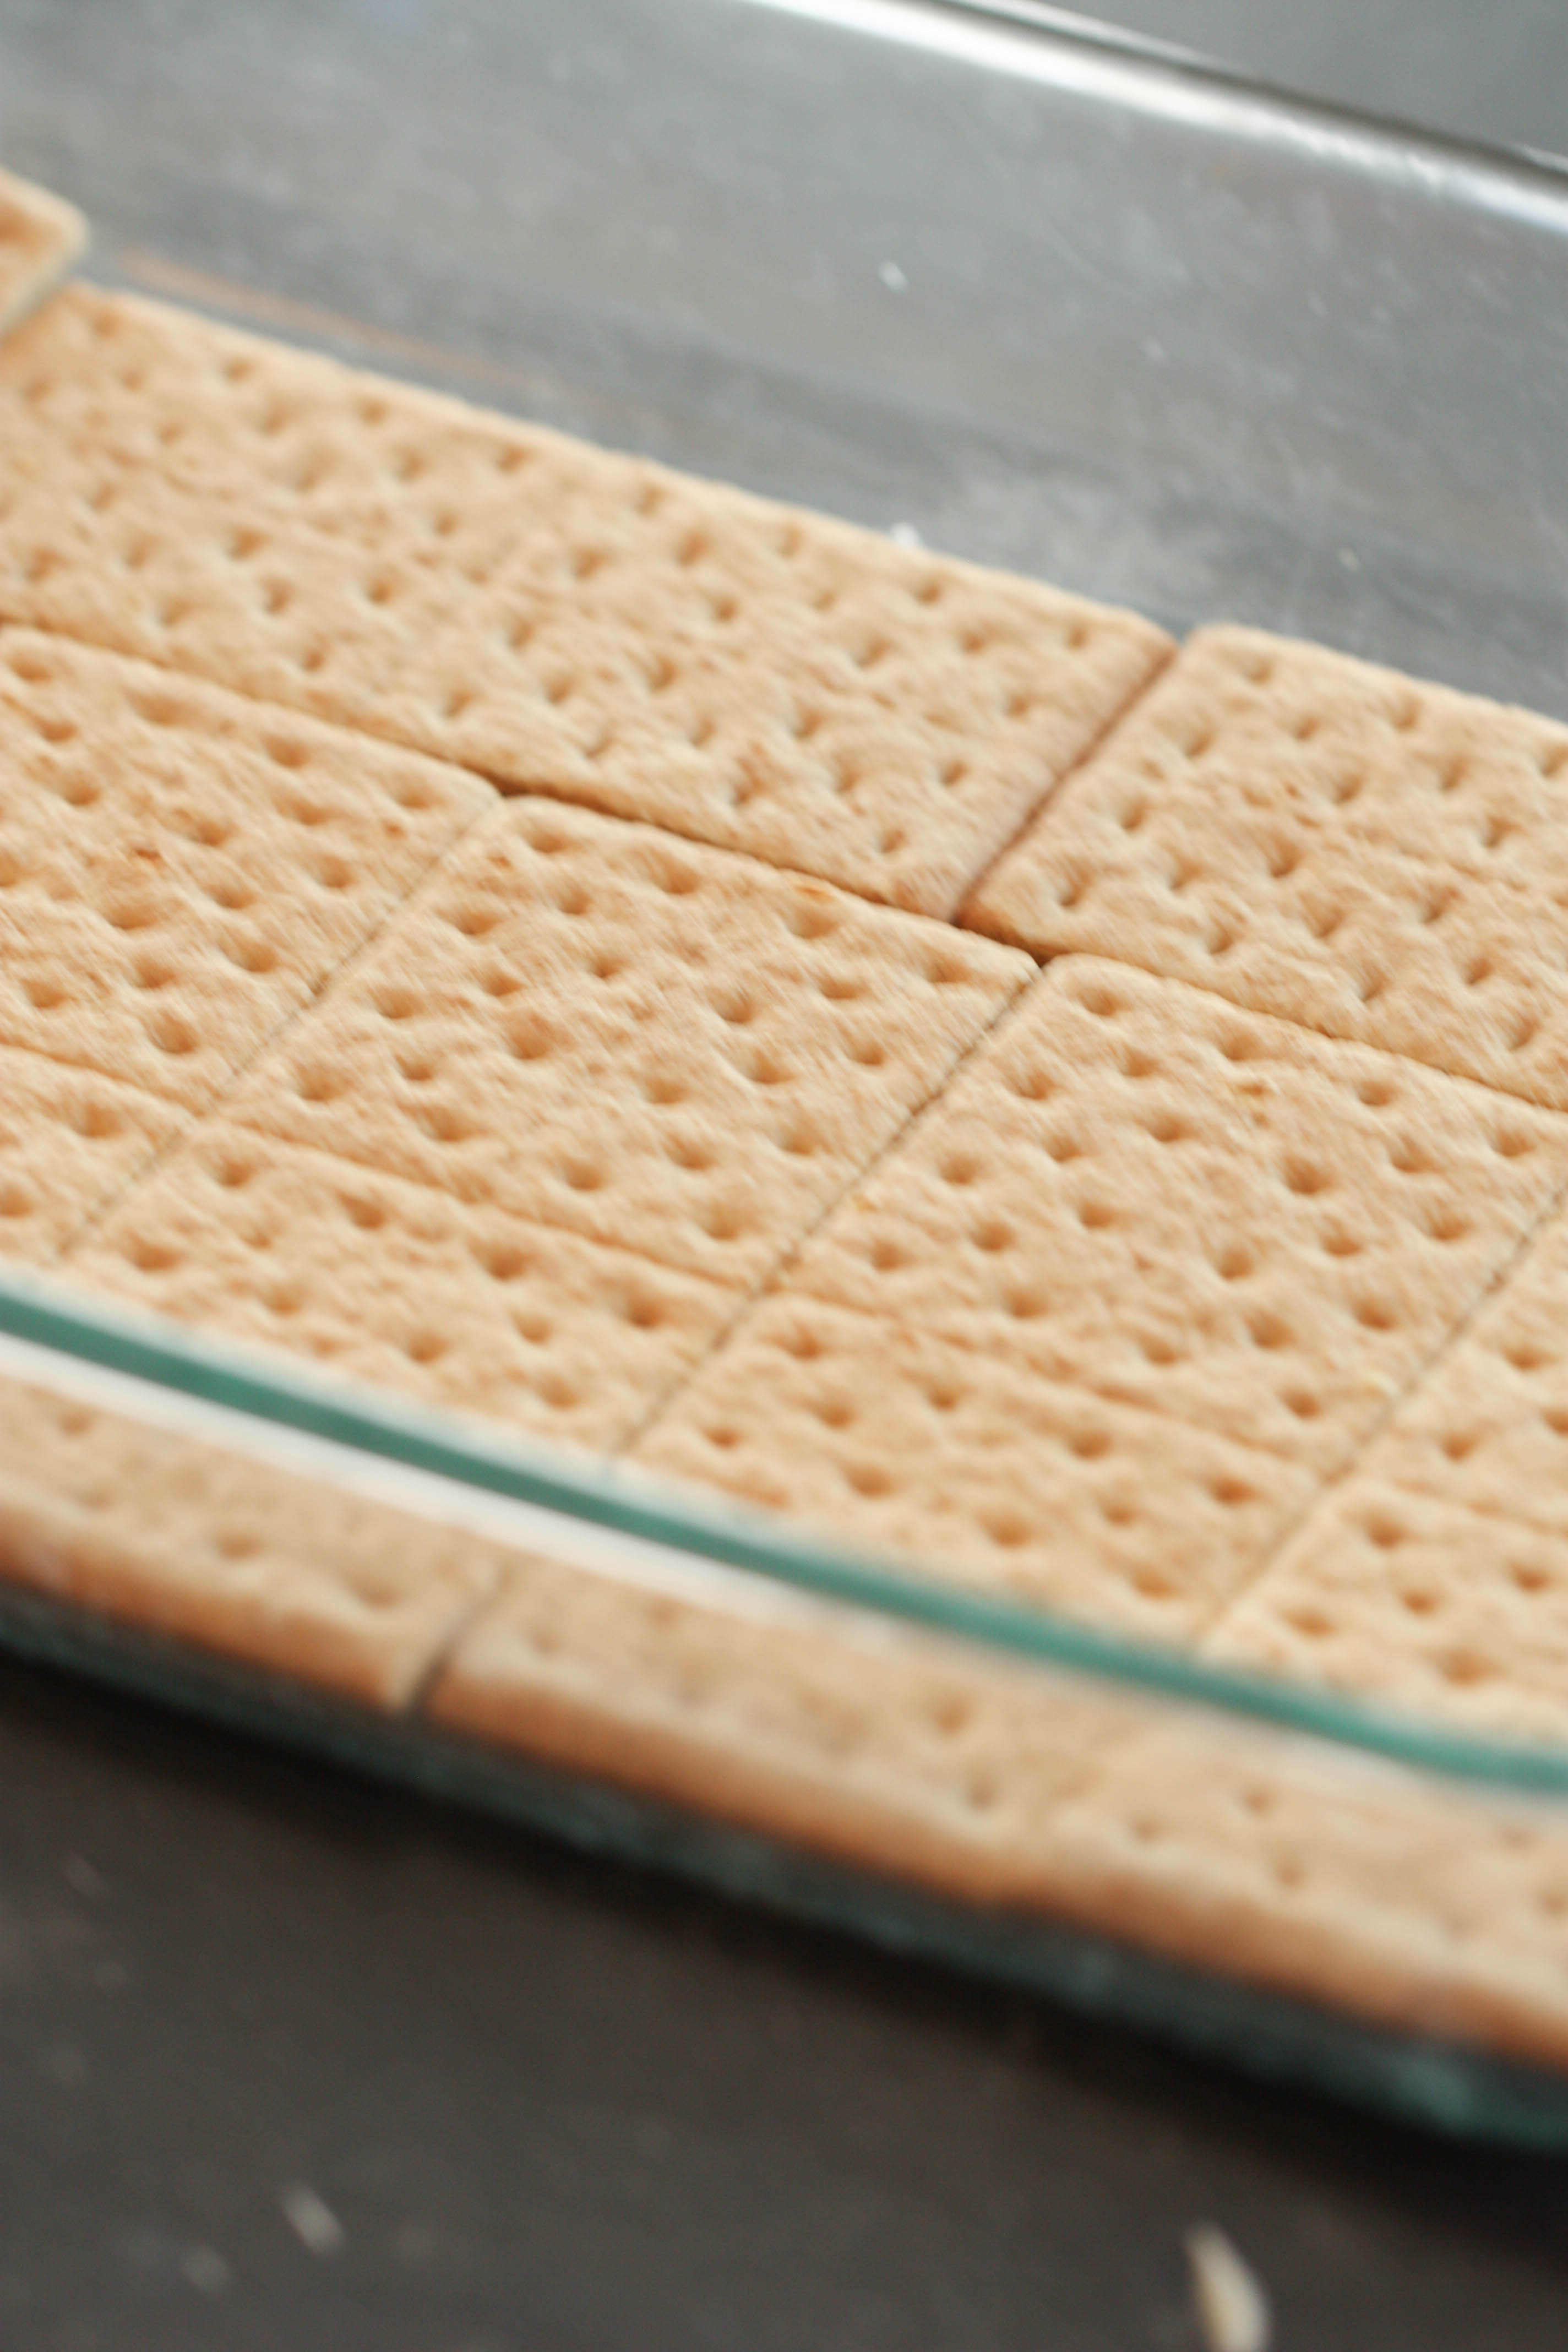 Graham crackers in the bottom of a 9x13 dish